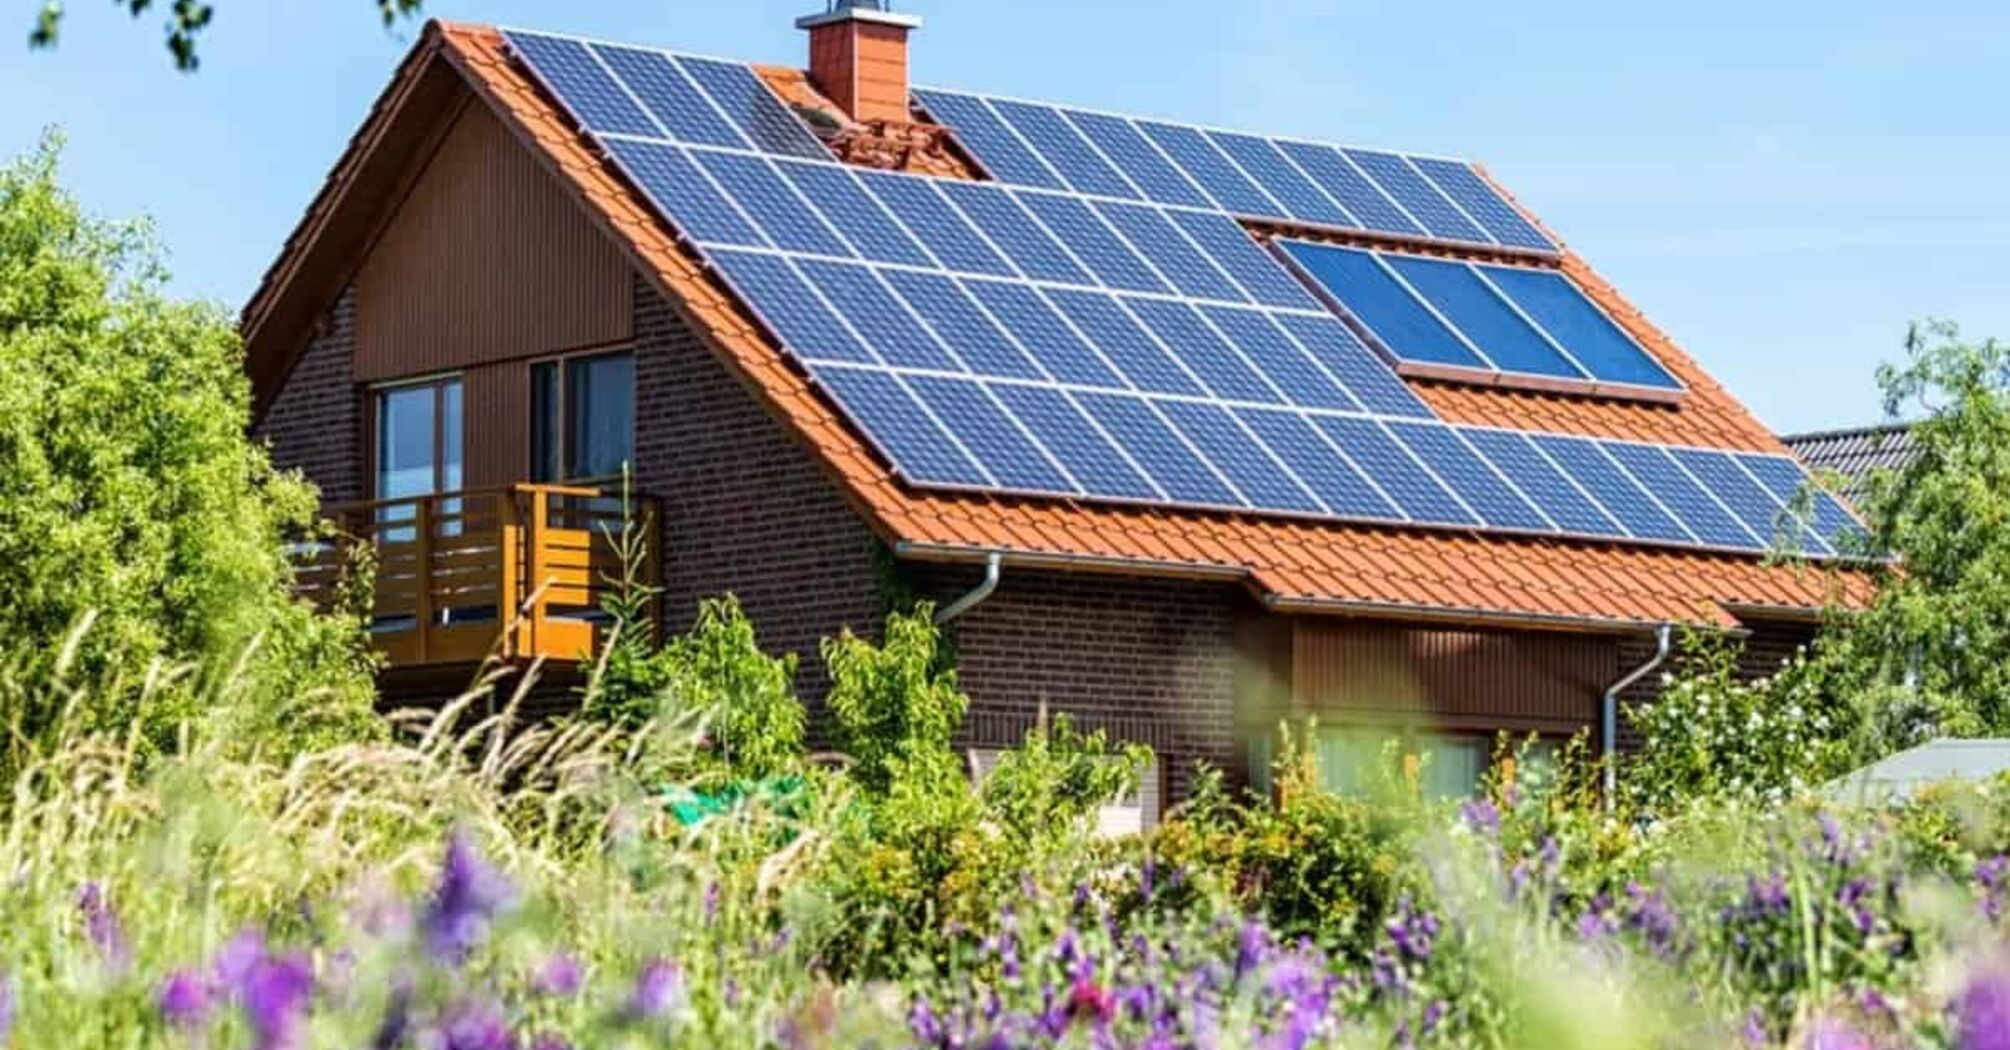 Advantages and disadvantages of solar panels in a private house